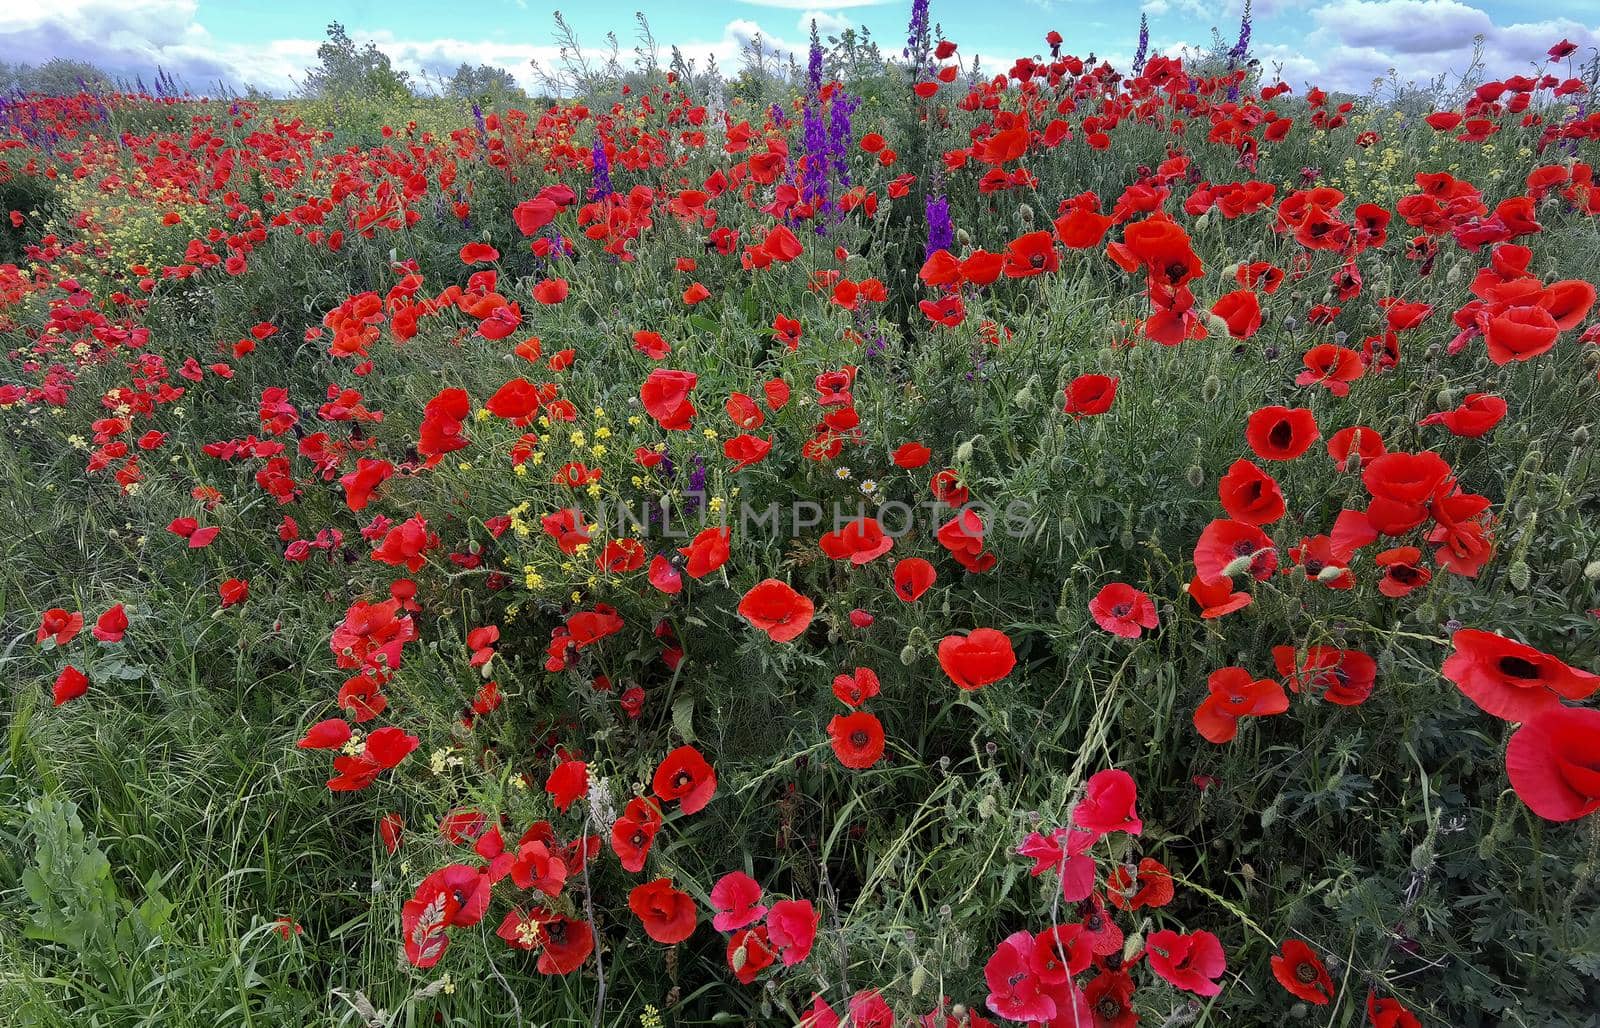 Purple flowers and poppies bloom in the wild fields. Beautiful rural flowers.